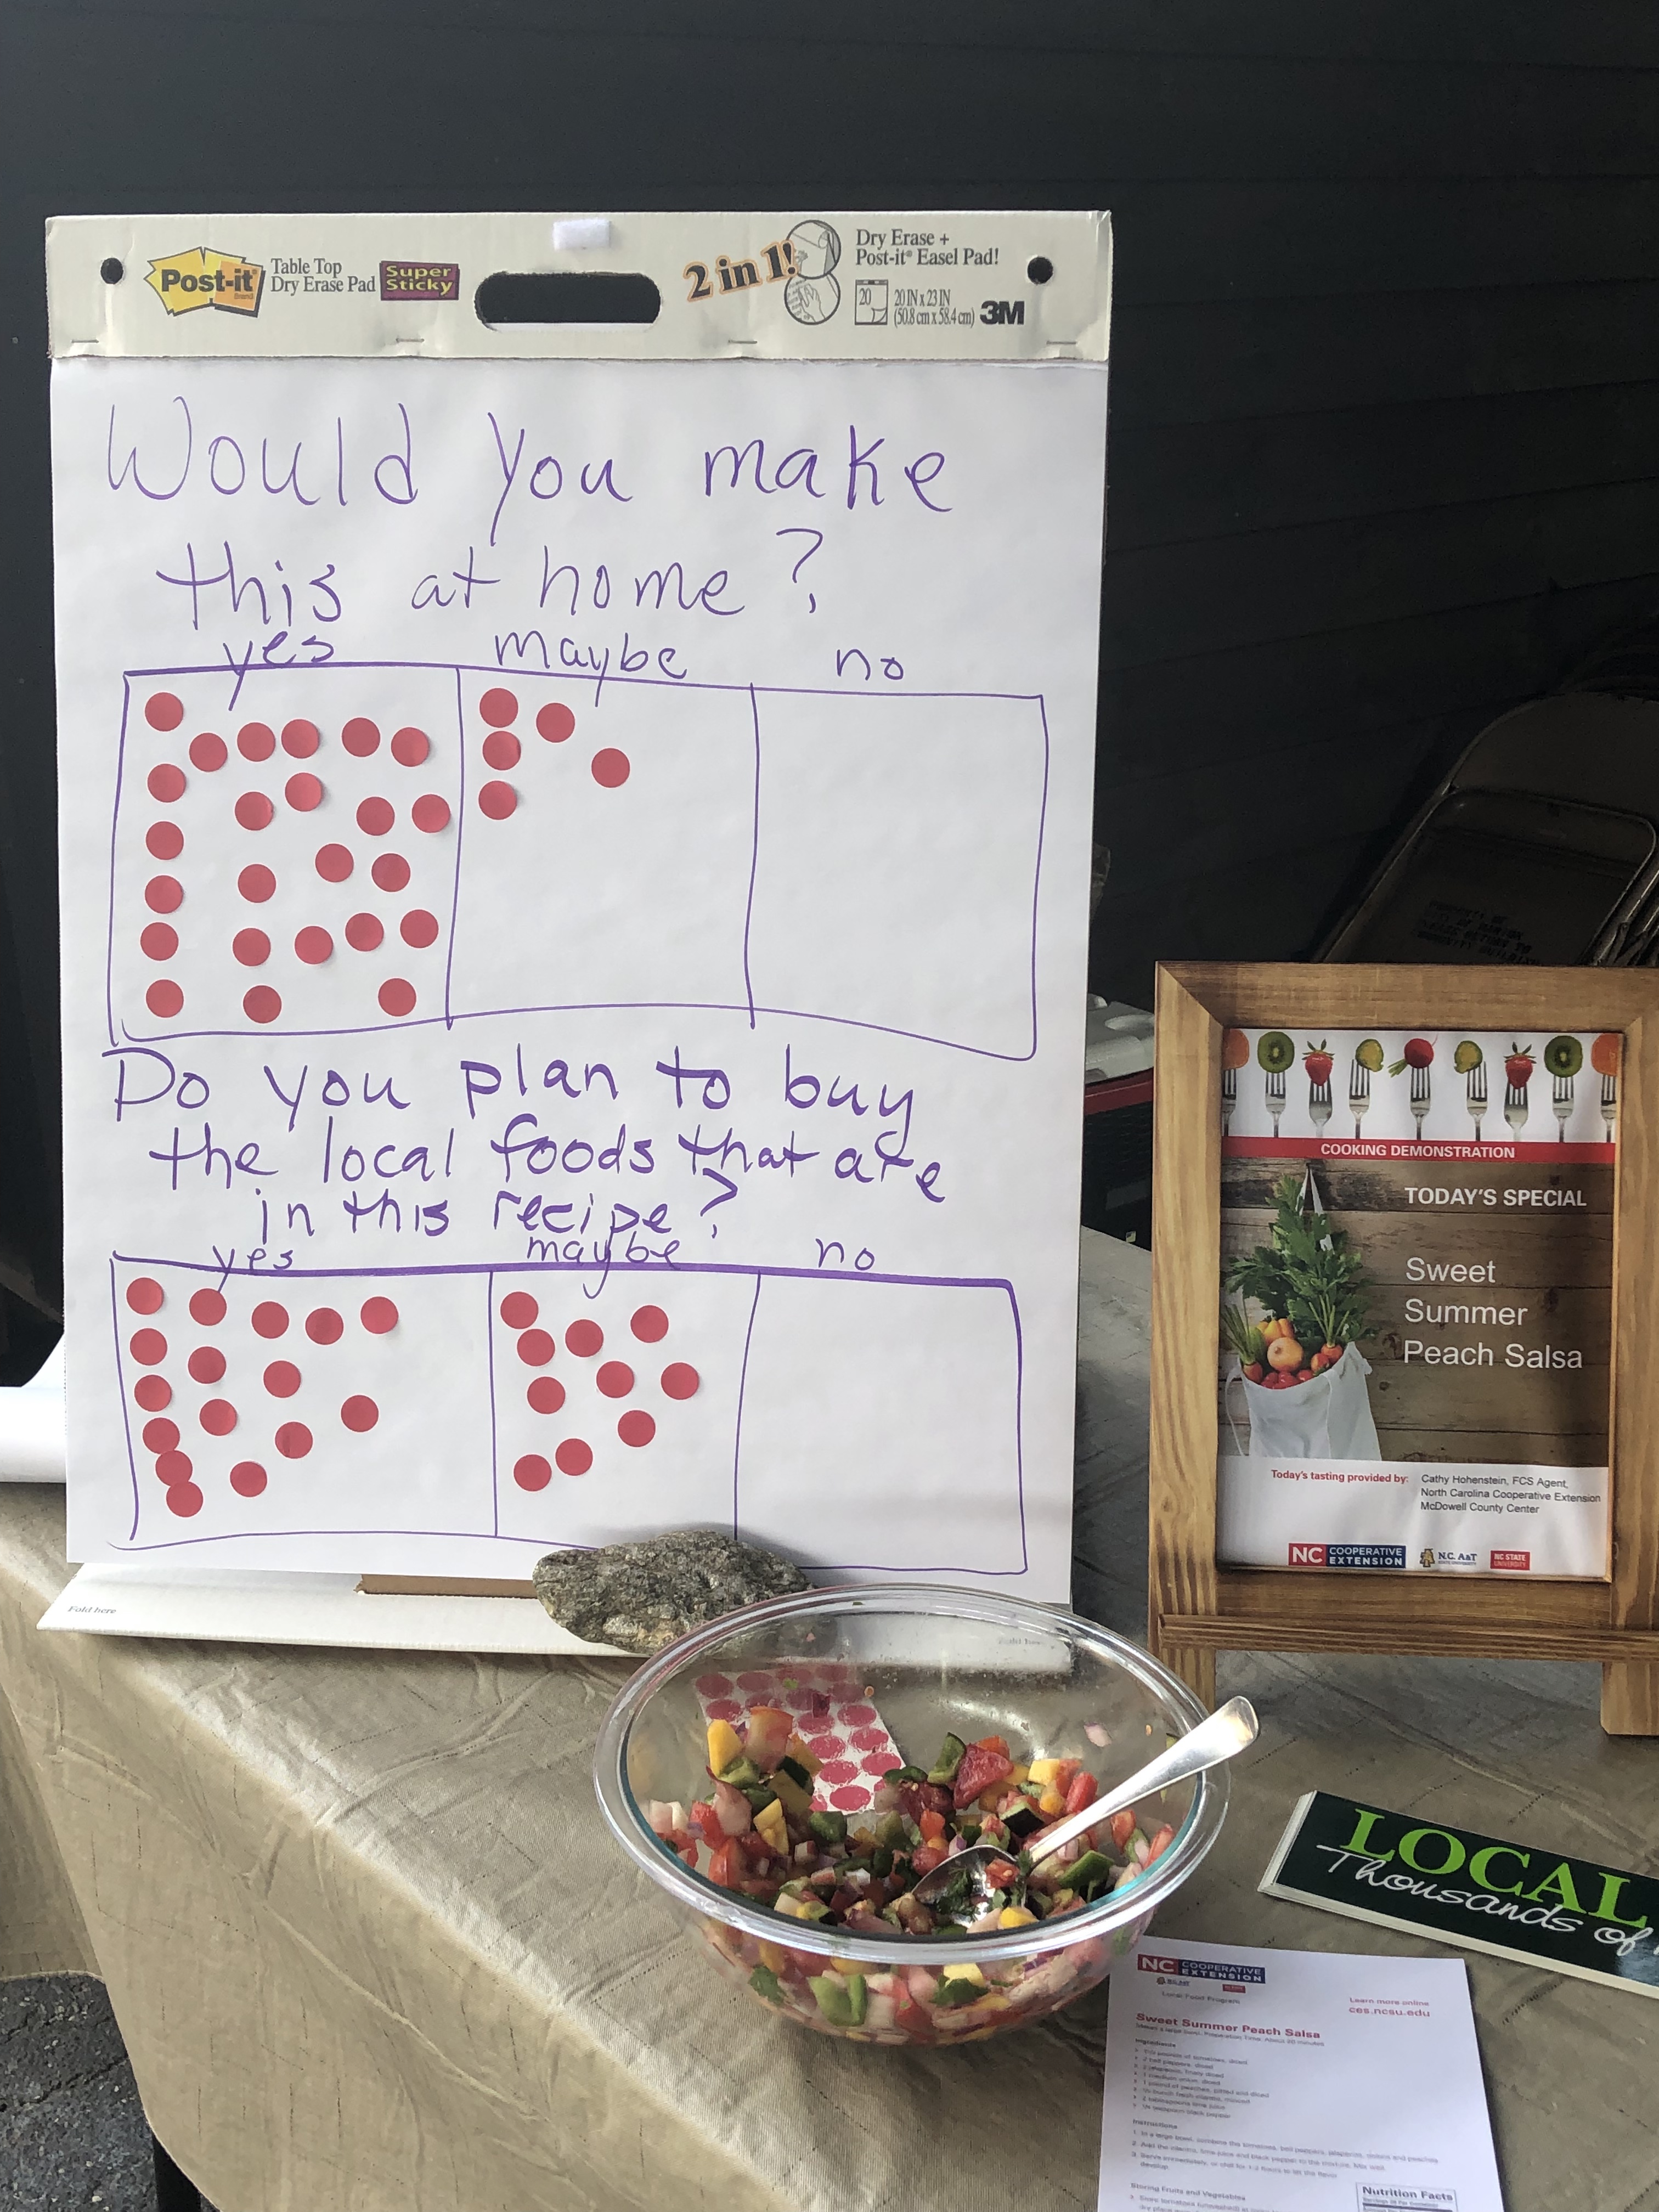 Dot survey board during a local food demonstration